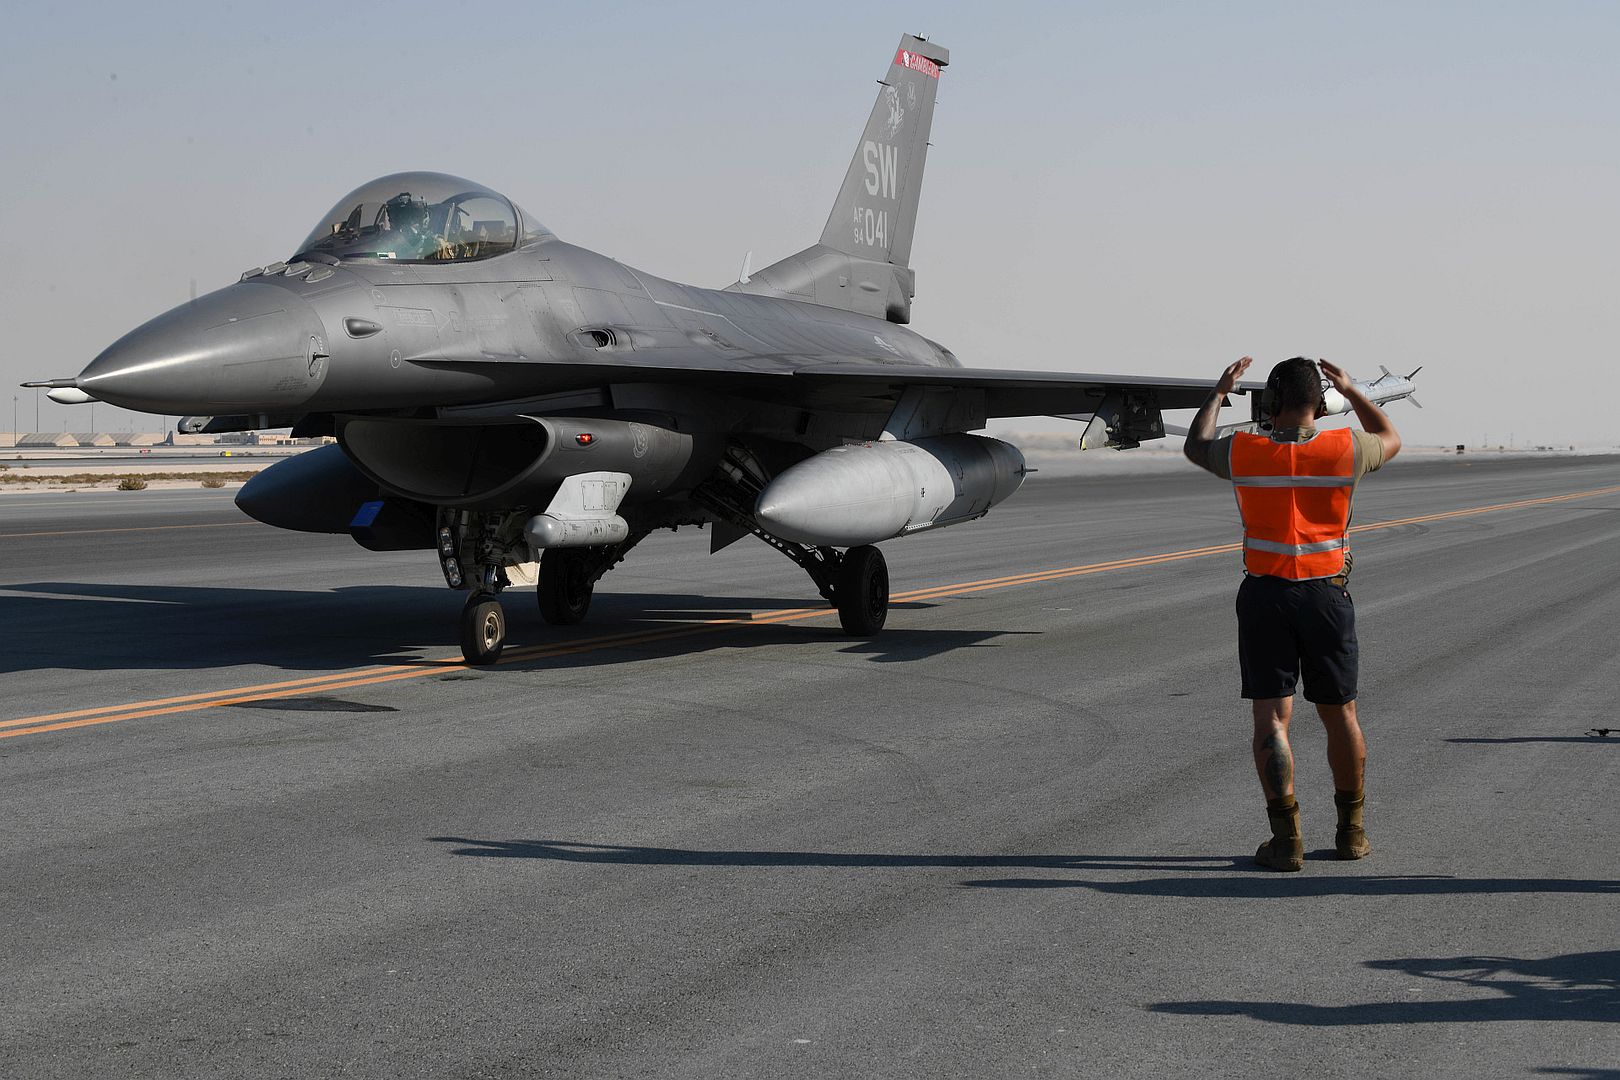 F 16 Fighting Falcon Assigned To The 77th Expeditionary Fighter Squadron At Prince Sultan Air Base 